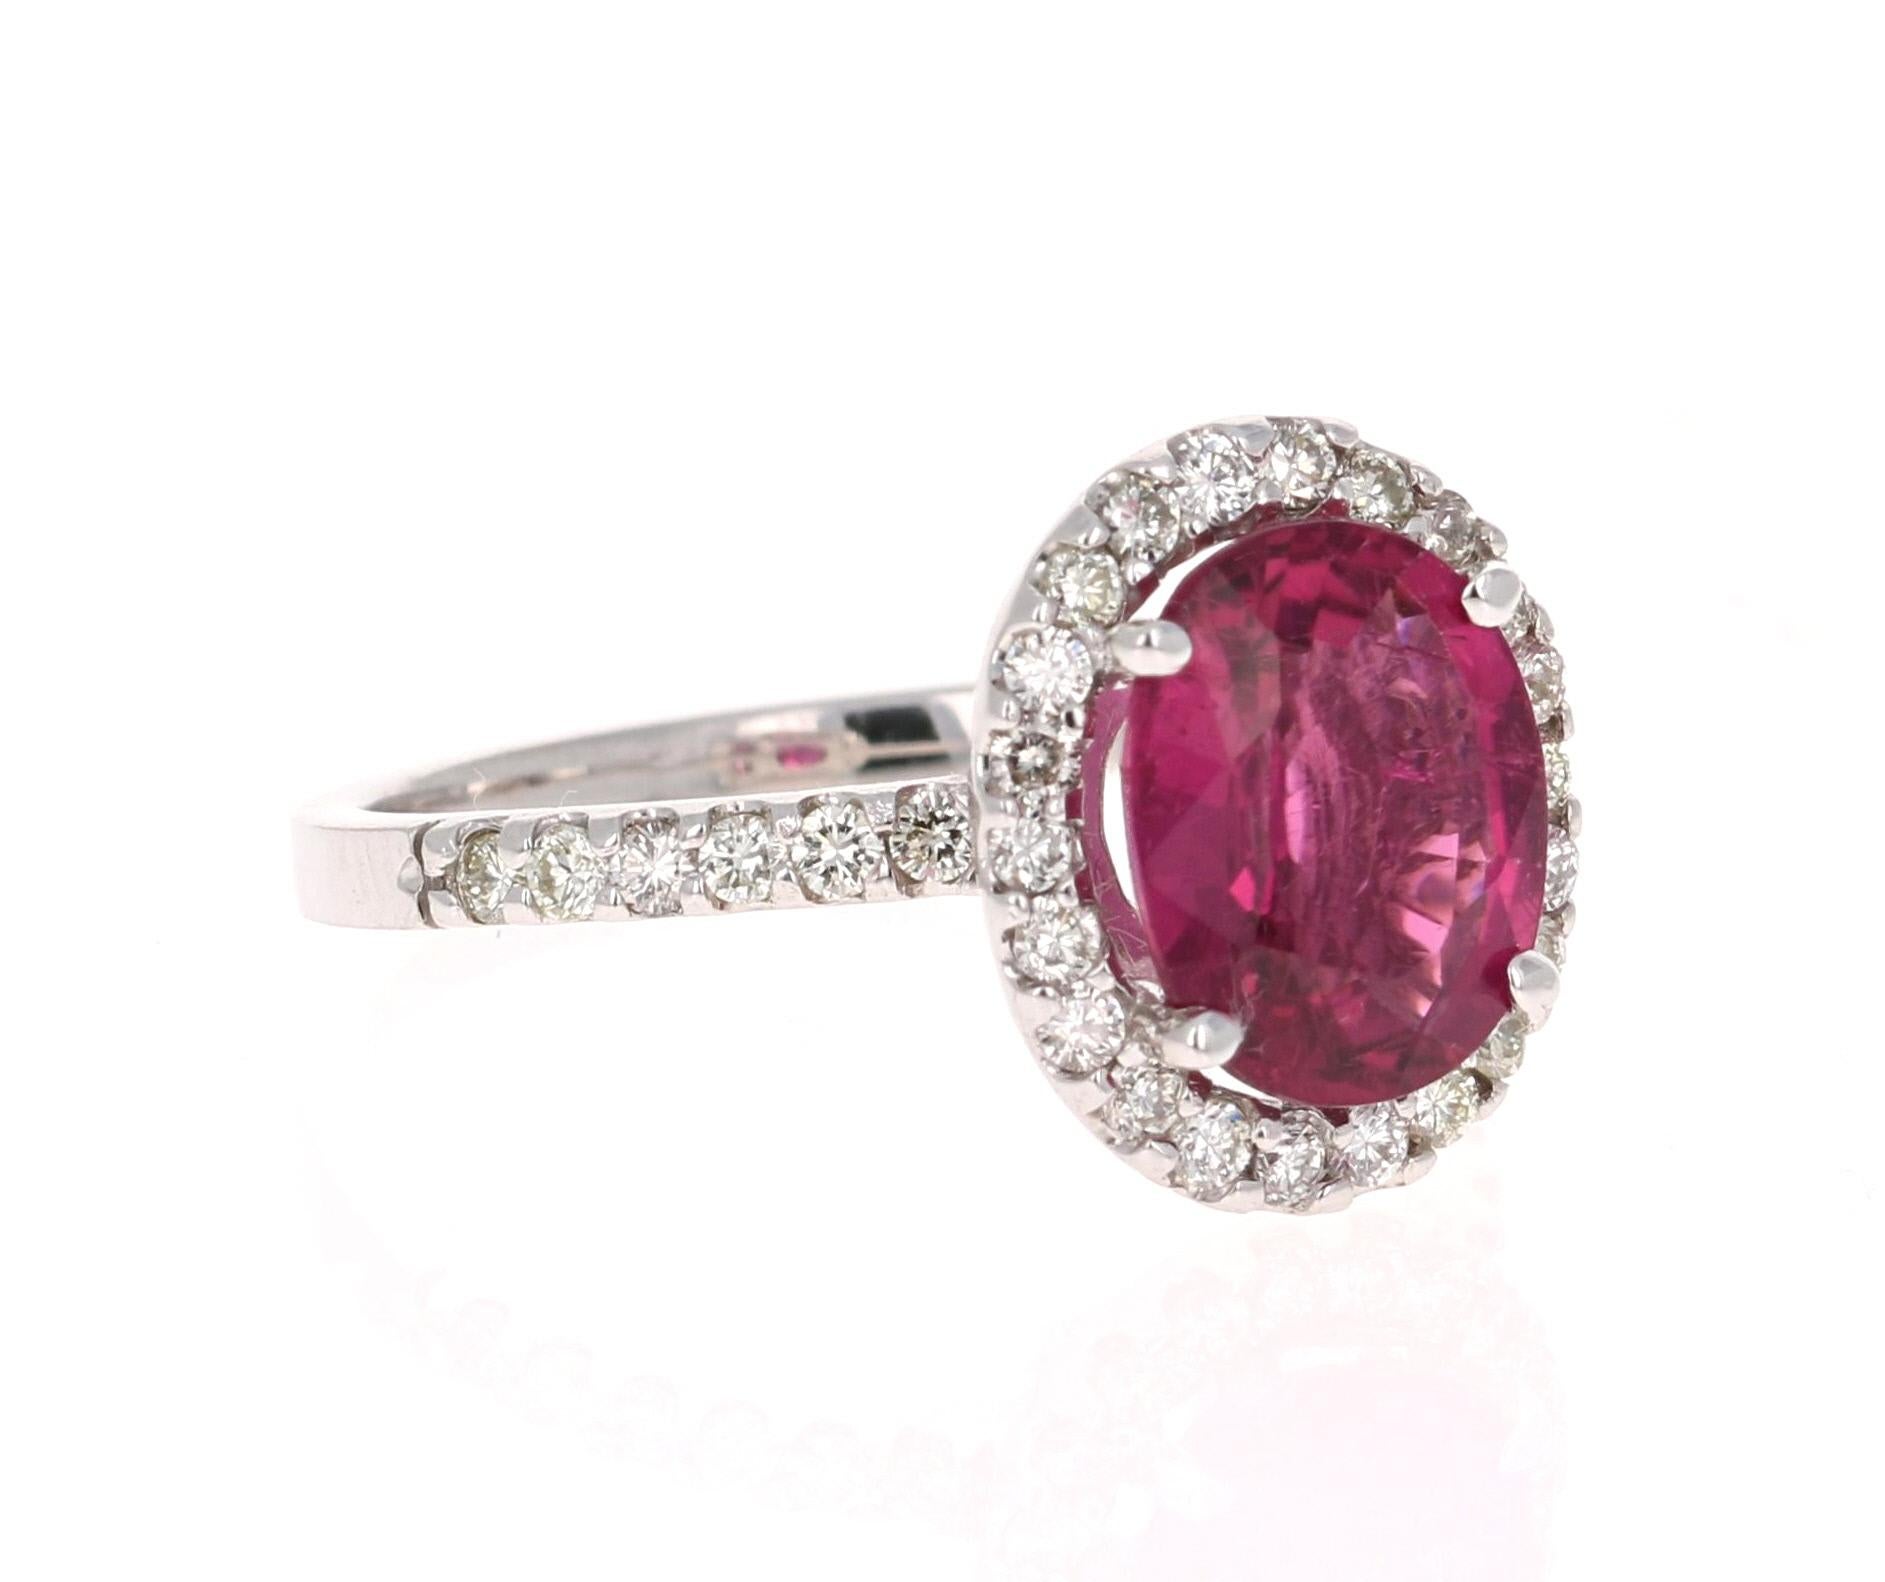 
This ring has an Oval Cut Pink Tourmaline that weighs 2.52 Carats. Floating around the tourmaline are 34 Round Cut Diamonds weighing 0.57 Carats. The total carat weight of the ring is 3.09 Carats. 

The ring is made in 14 Karat White Gold and